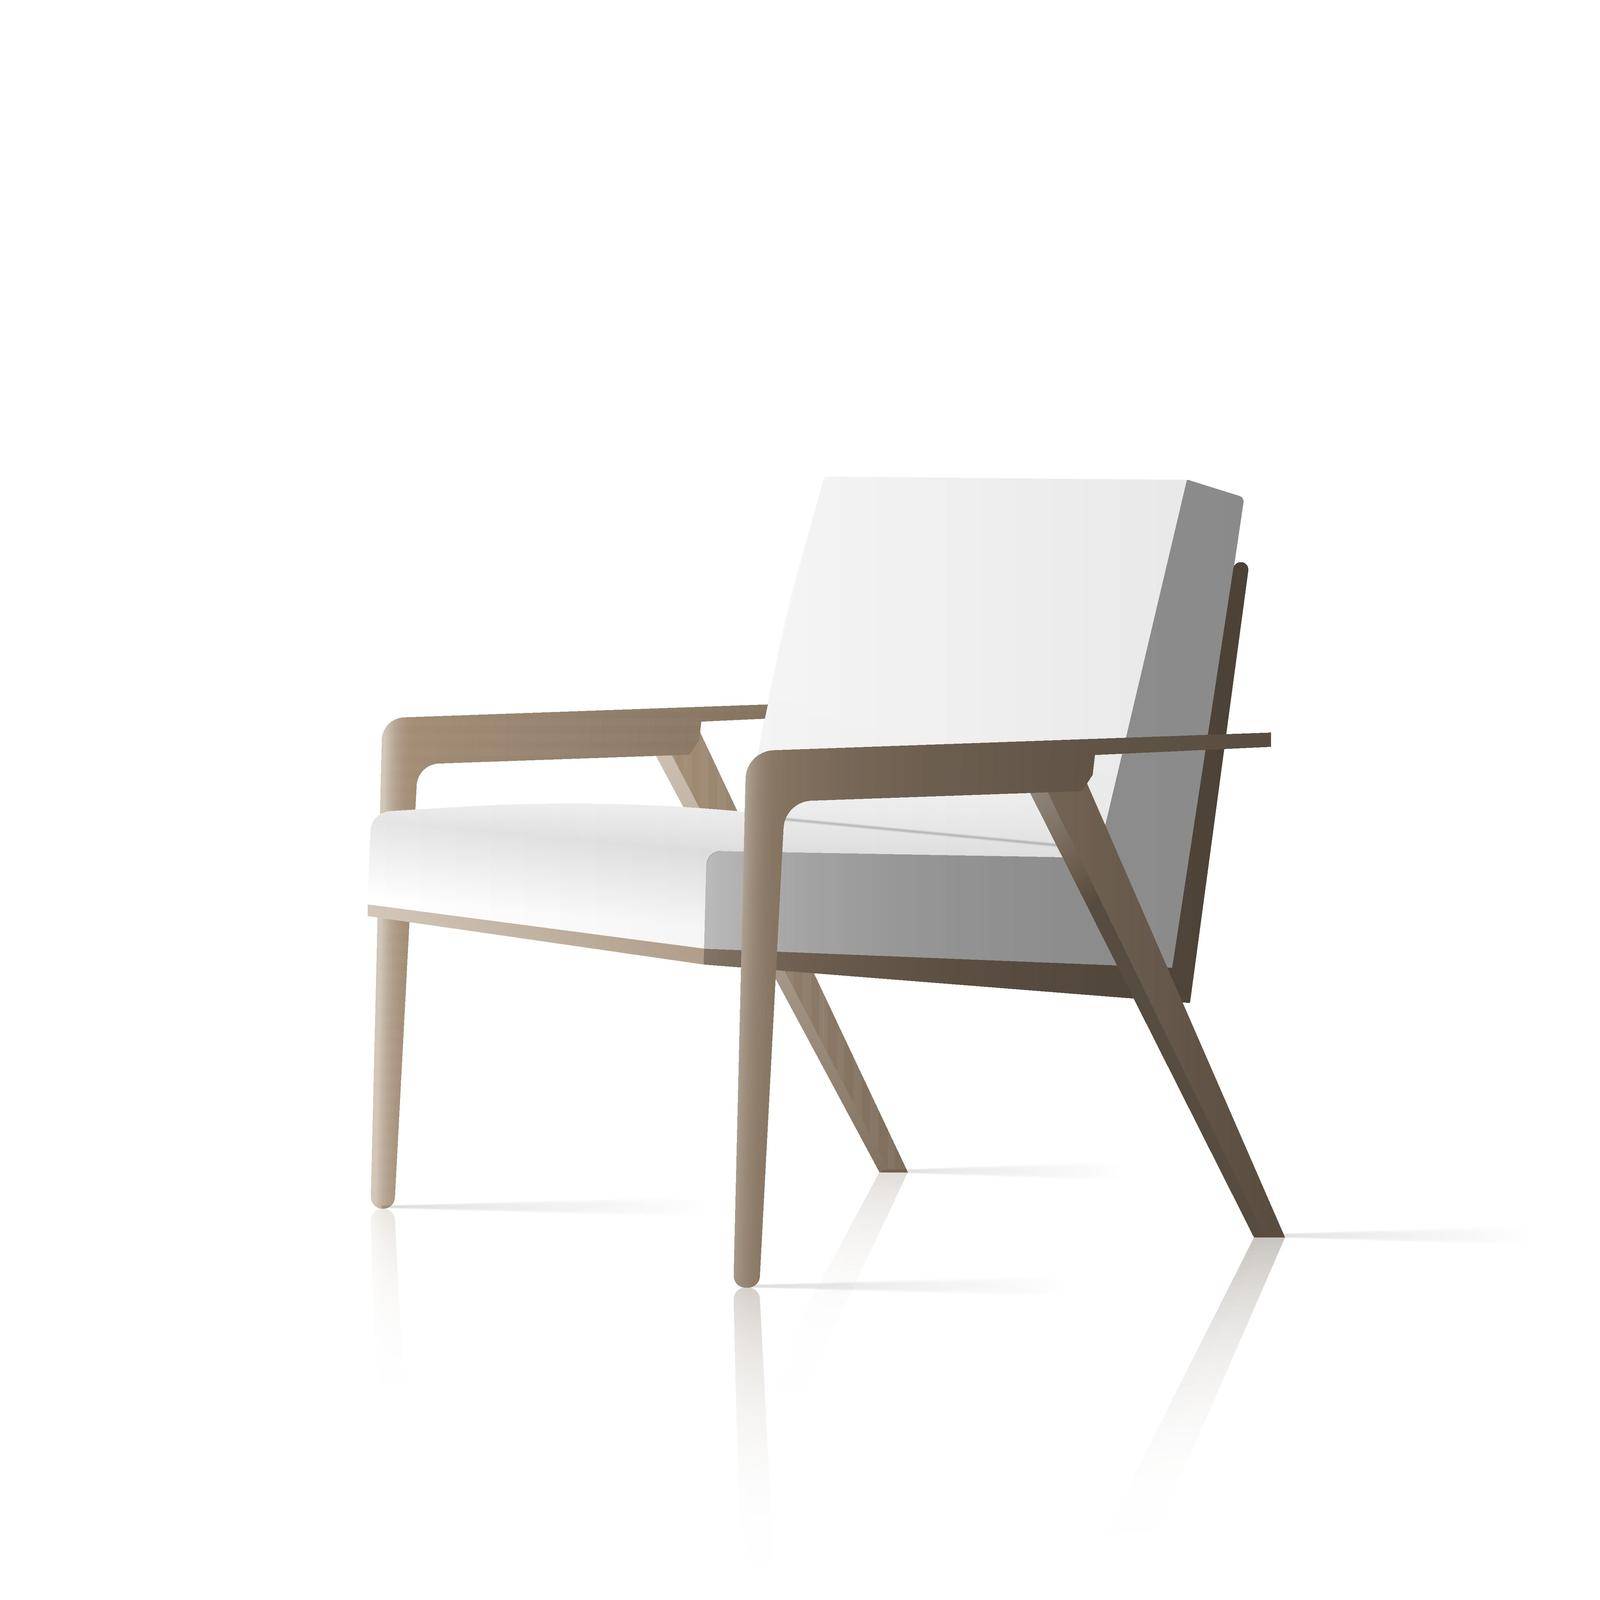 White armchair with wooden legs. Realistic vector armchair in the loft style. Interior design element. by Javvani